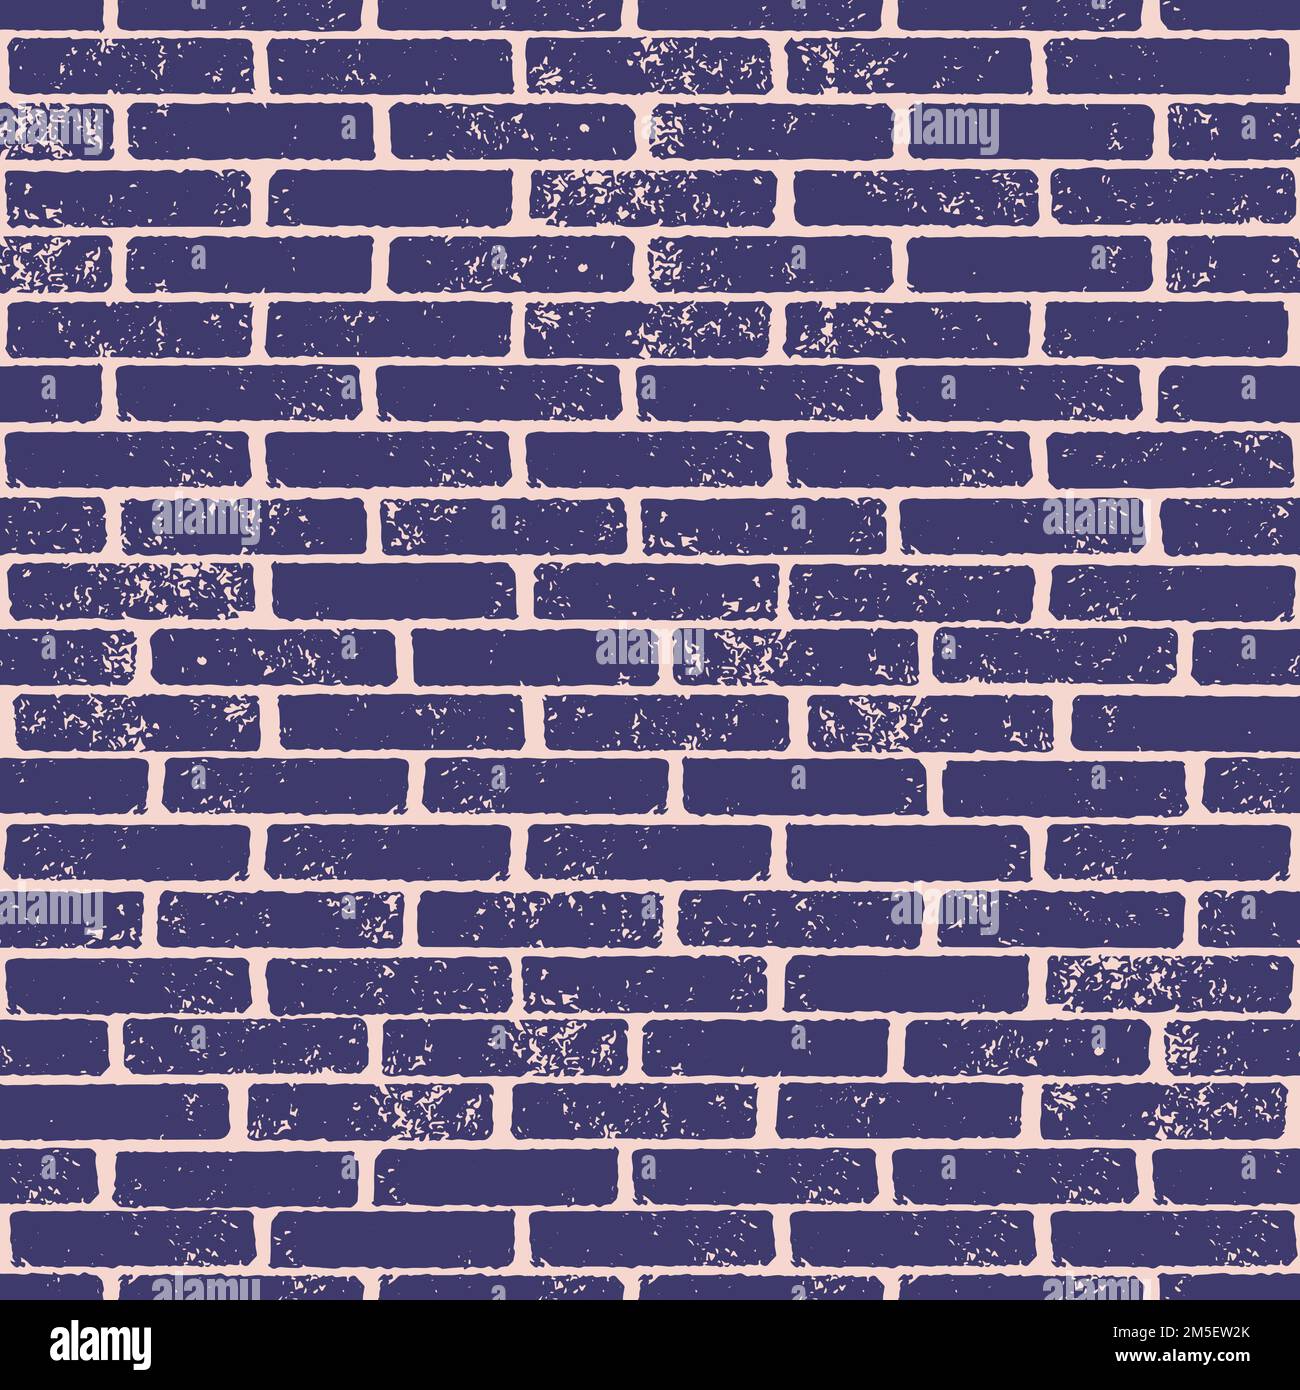 Textured brick wall seamless repeat pattern. Vector illustration. Great for scrapbook, packaging, backgrounds Stock Vector